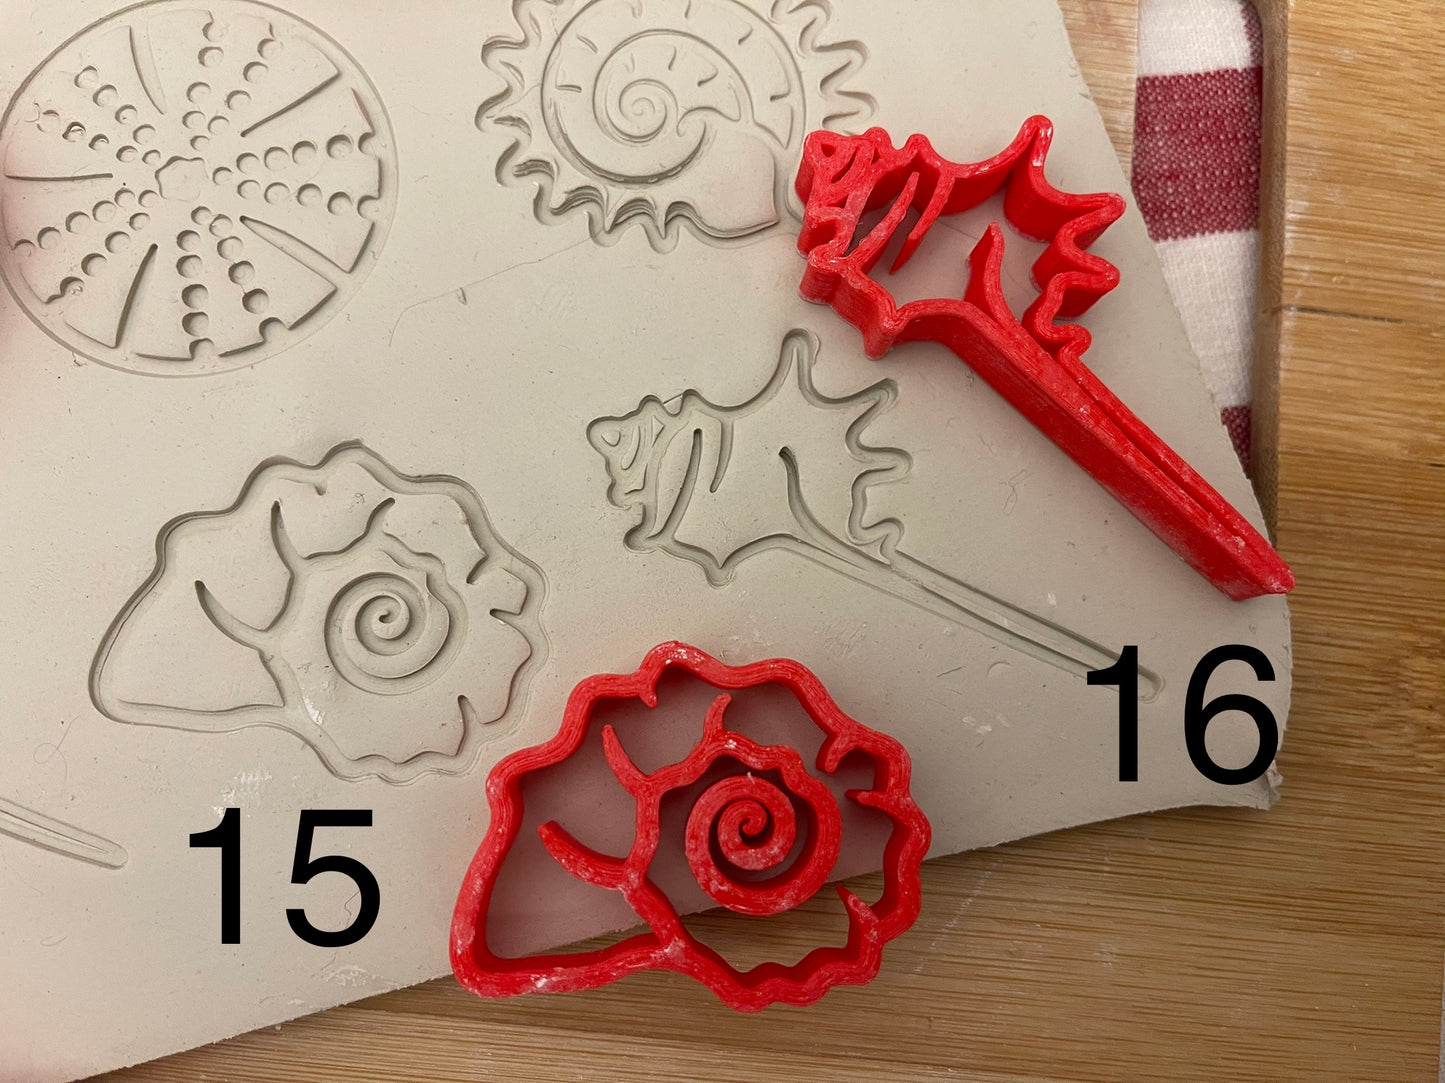 Lot of Seashell stamps - plastic 3D printed, multiple designs/sizes, Each or sets available